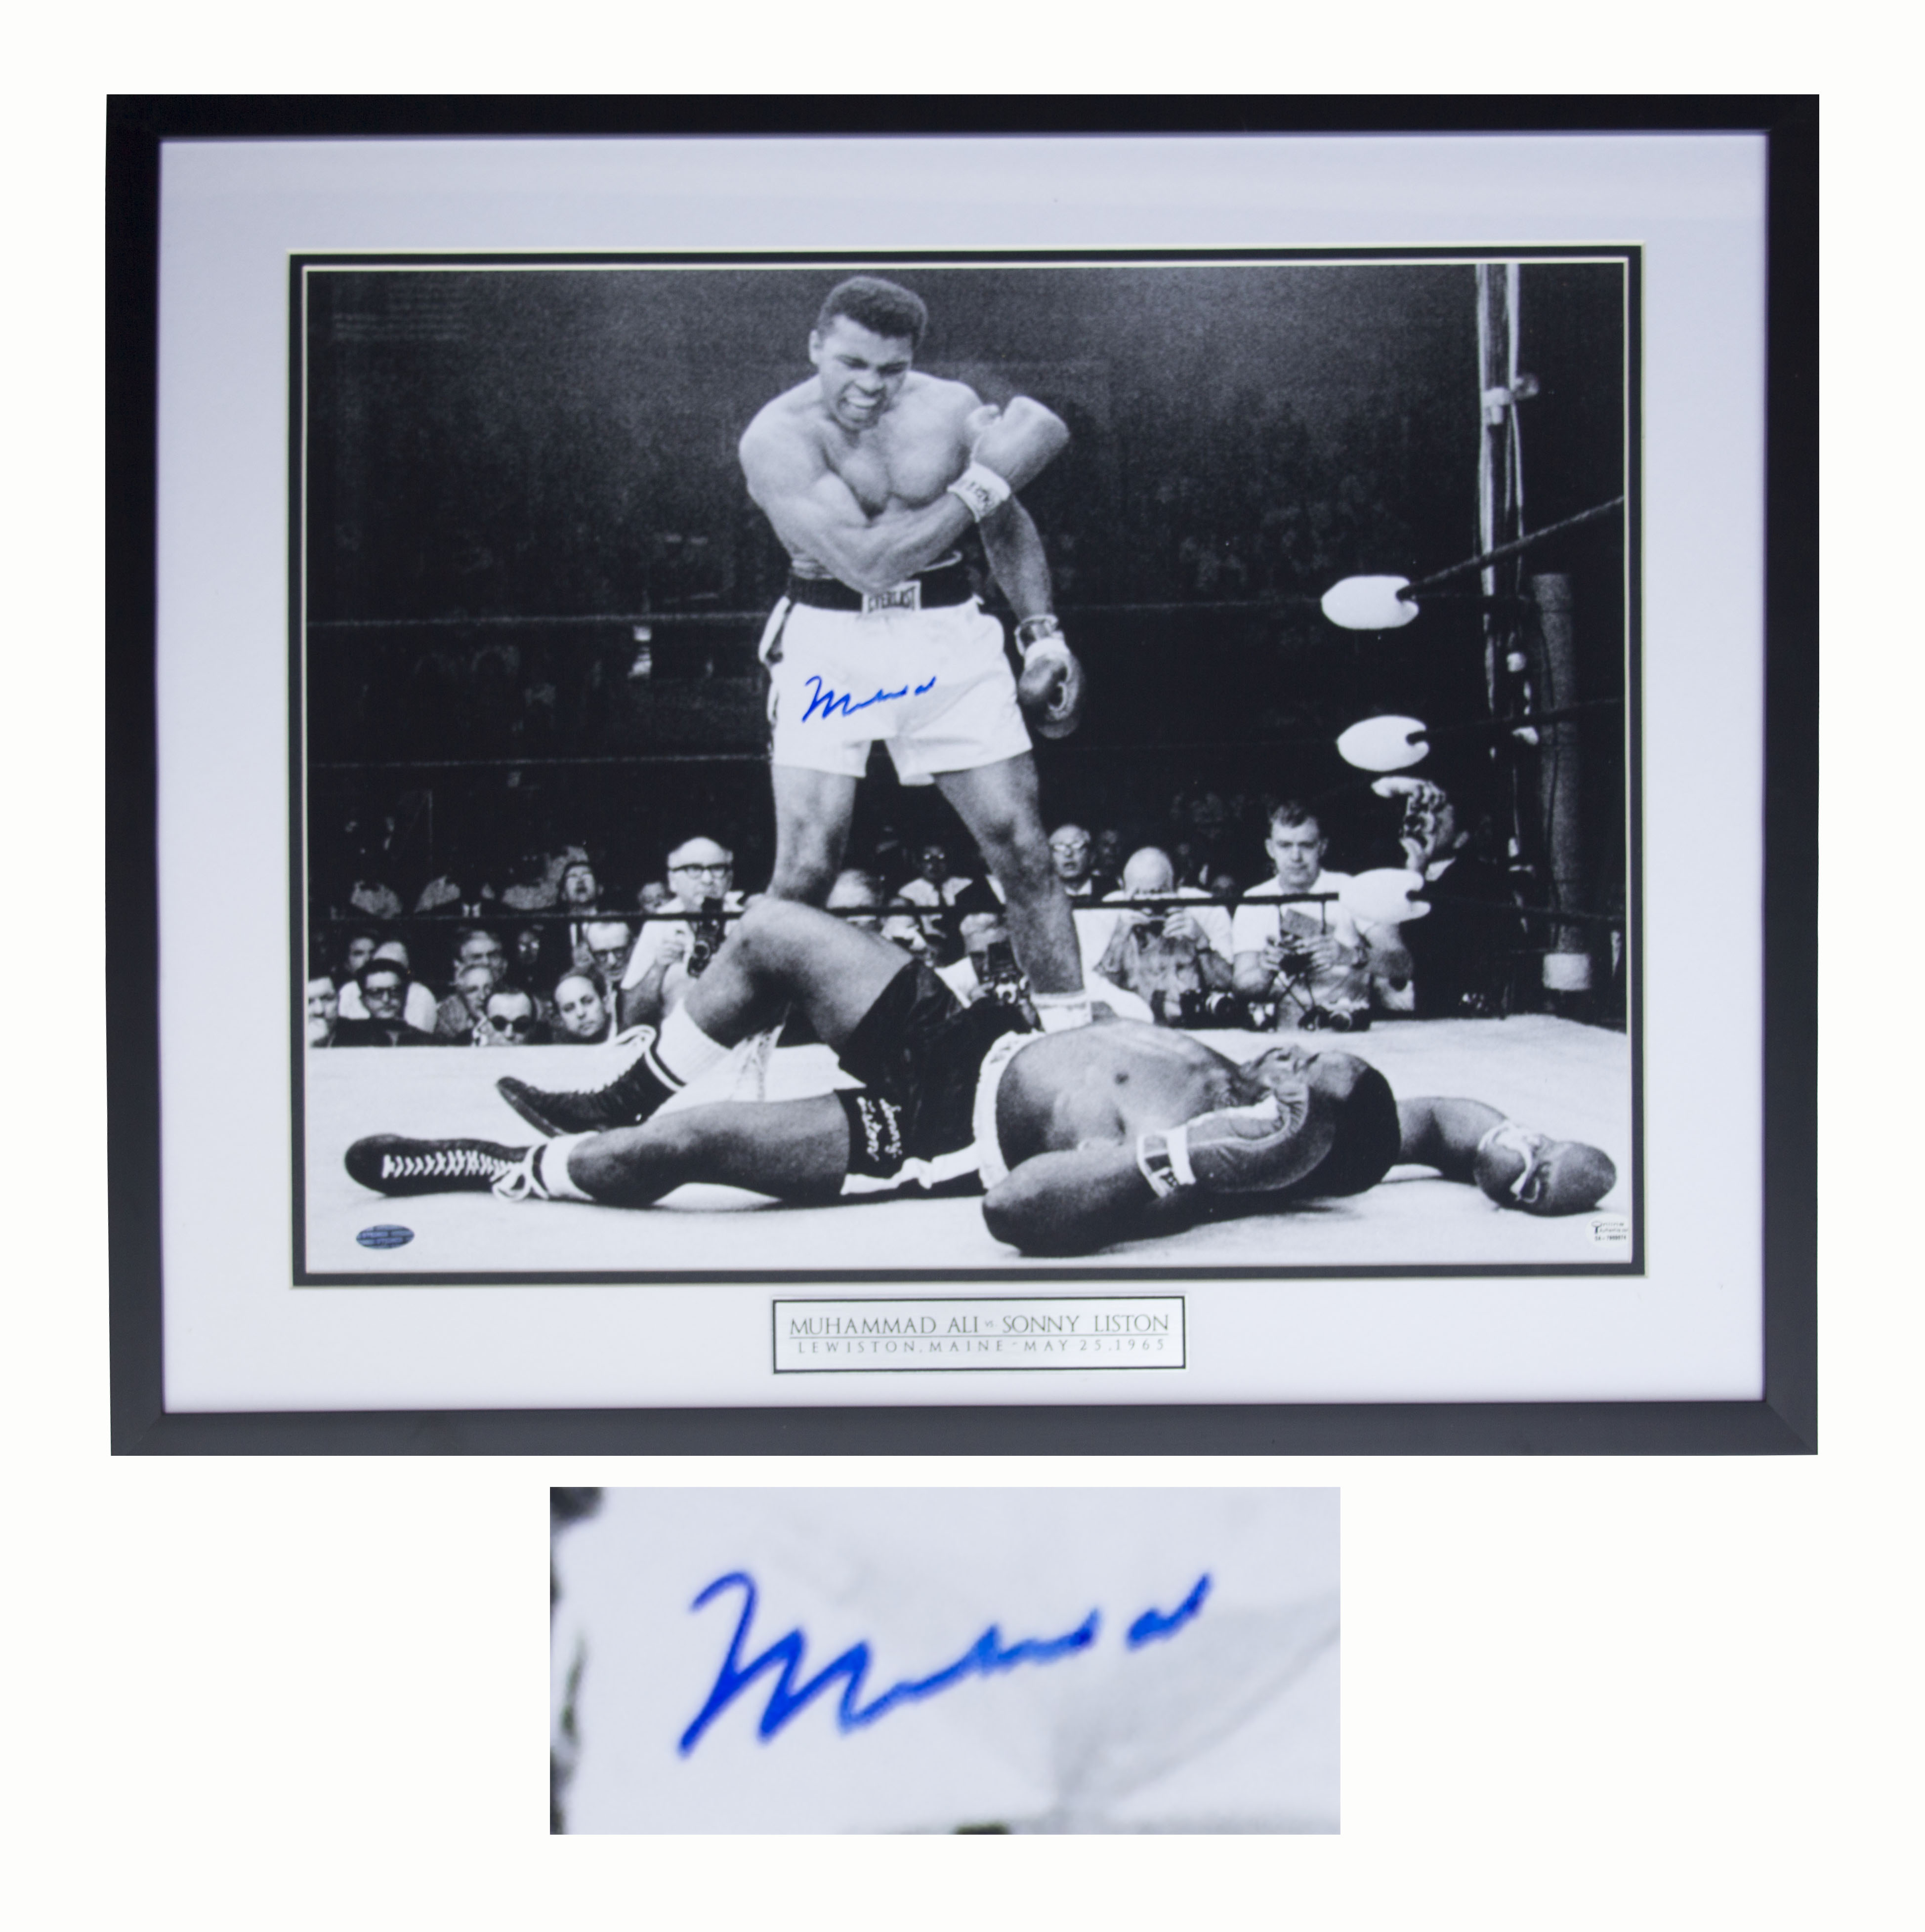 Muhammad Ali UNSIGNED photo K3254 Knocked out former champ Sonny Liston 